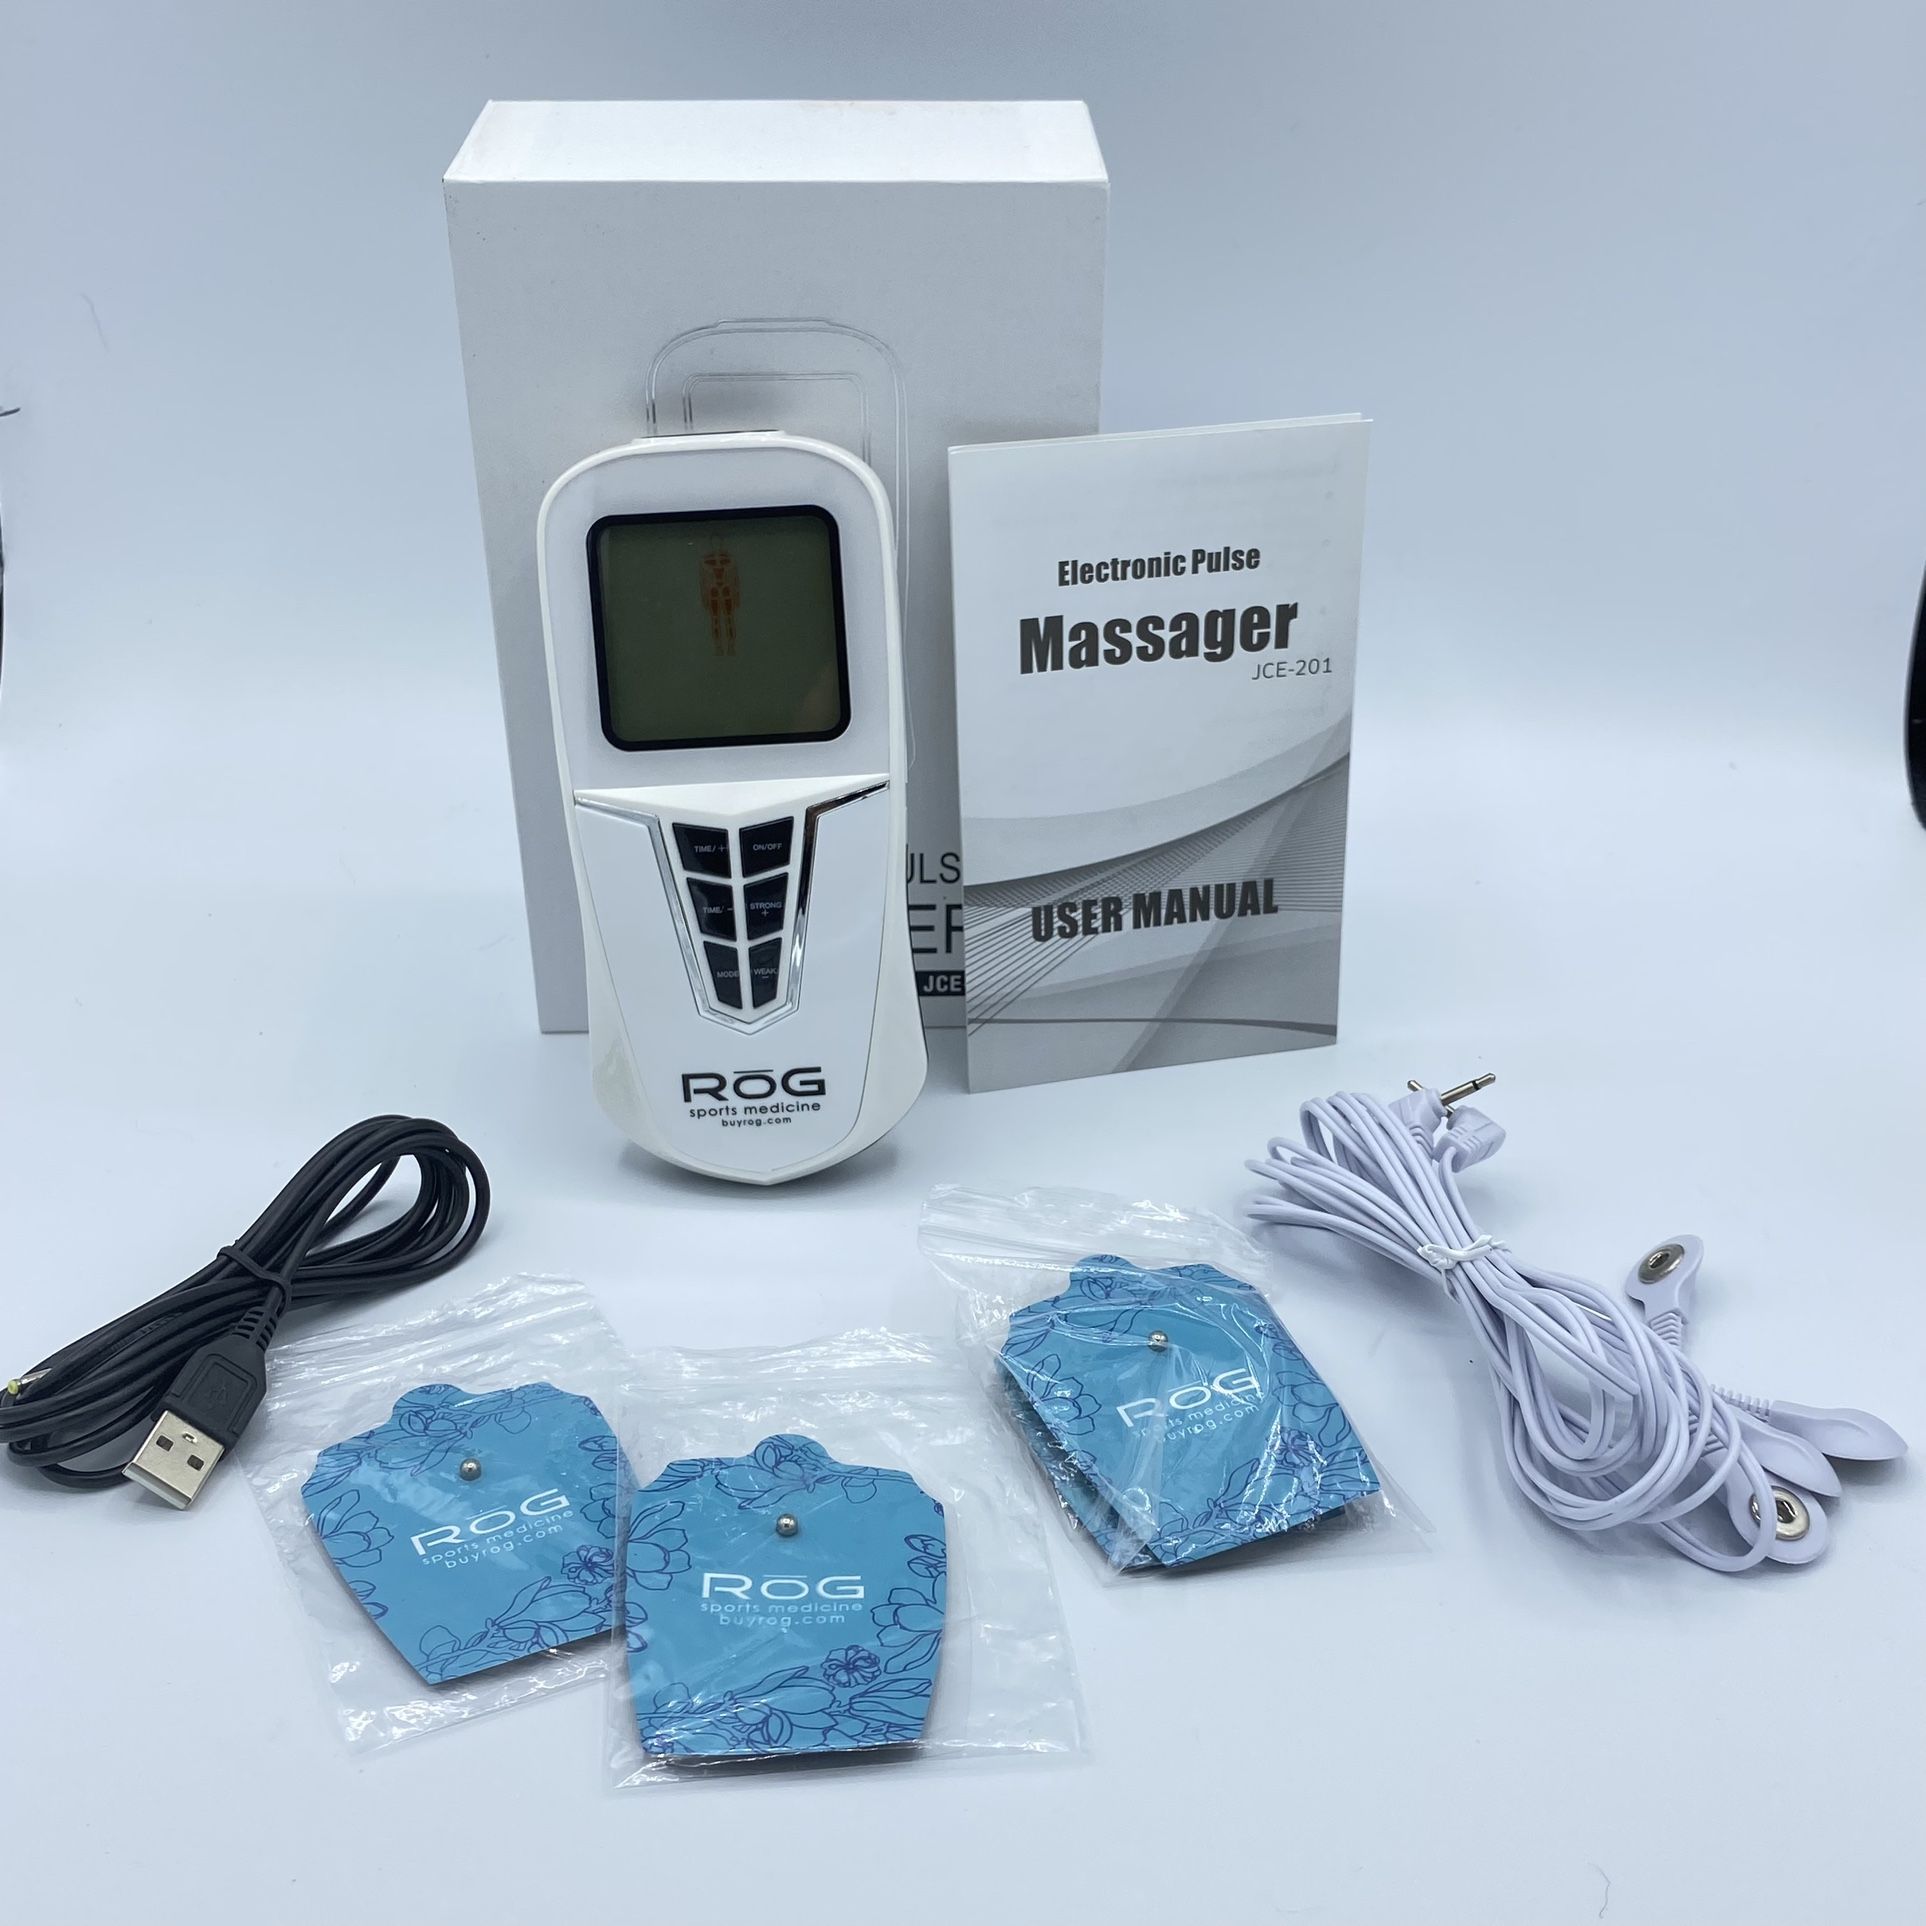 Muscle Stimulation Relax Electronic Pulse Massager Intelligent With Pads